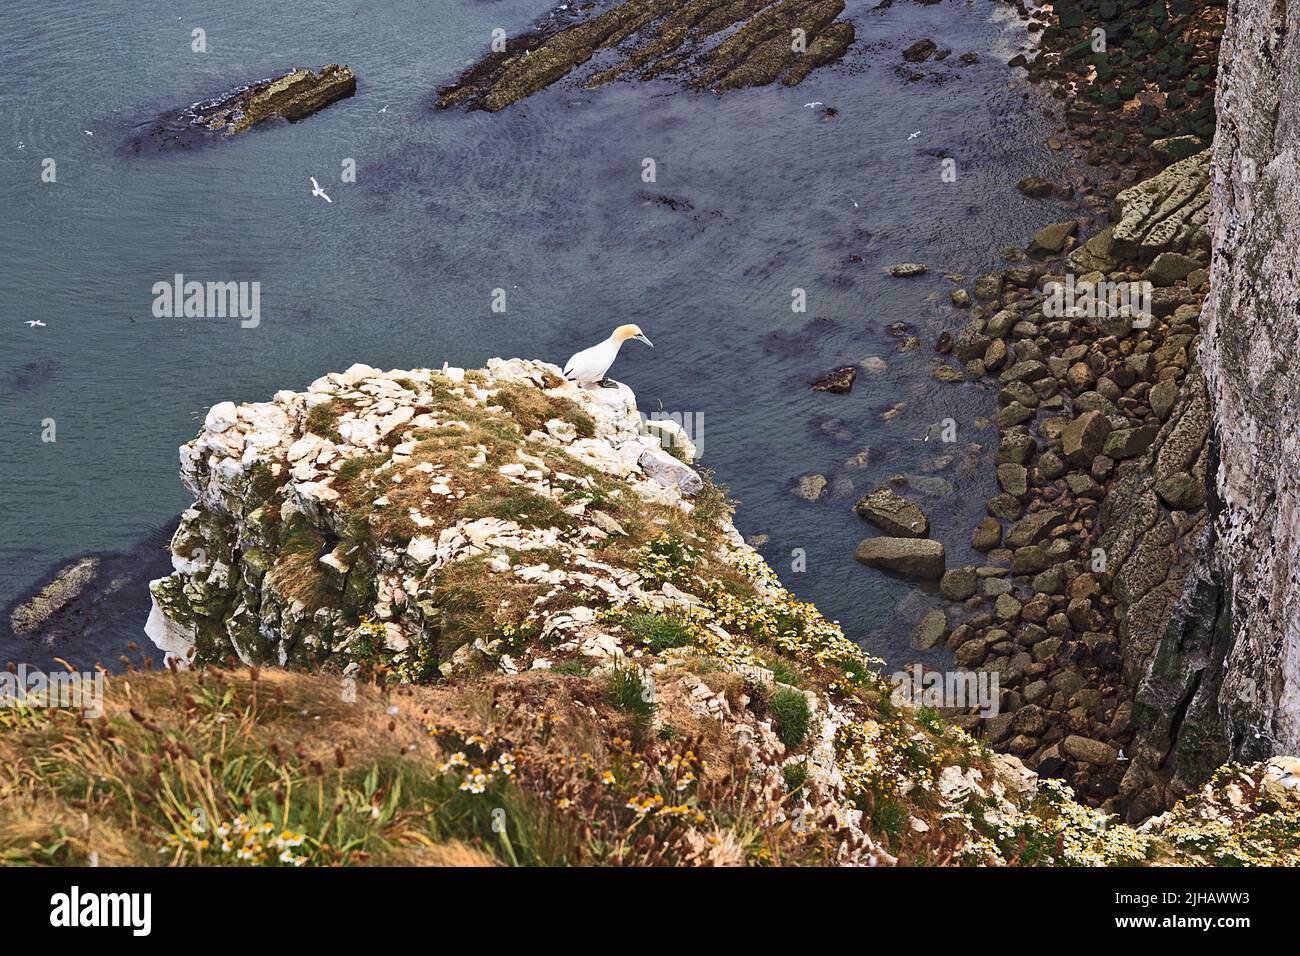 Gannet on top of cliff at Bempton Cliffs in Yorkshire England Stock Photo